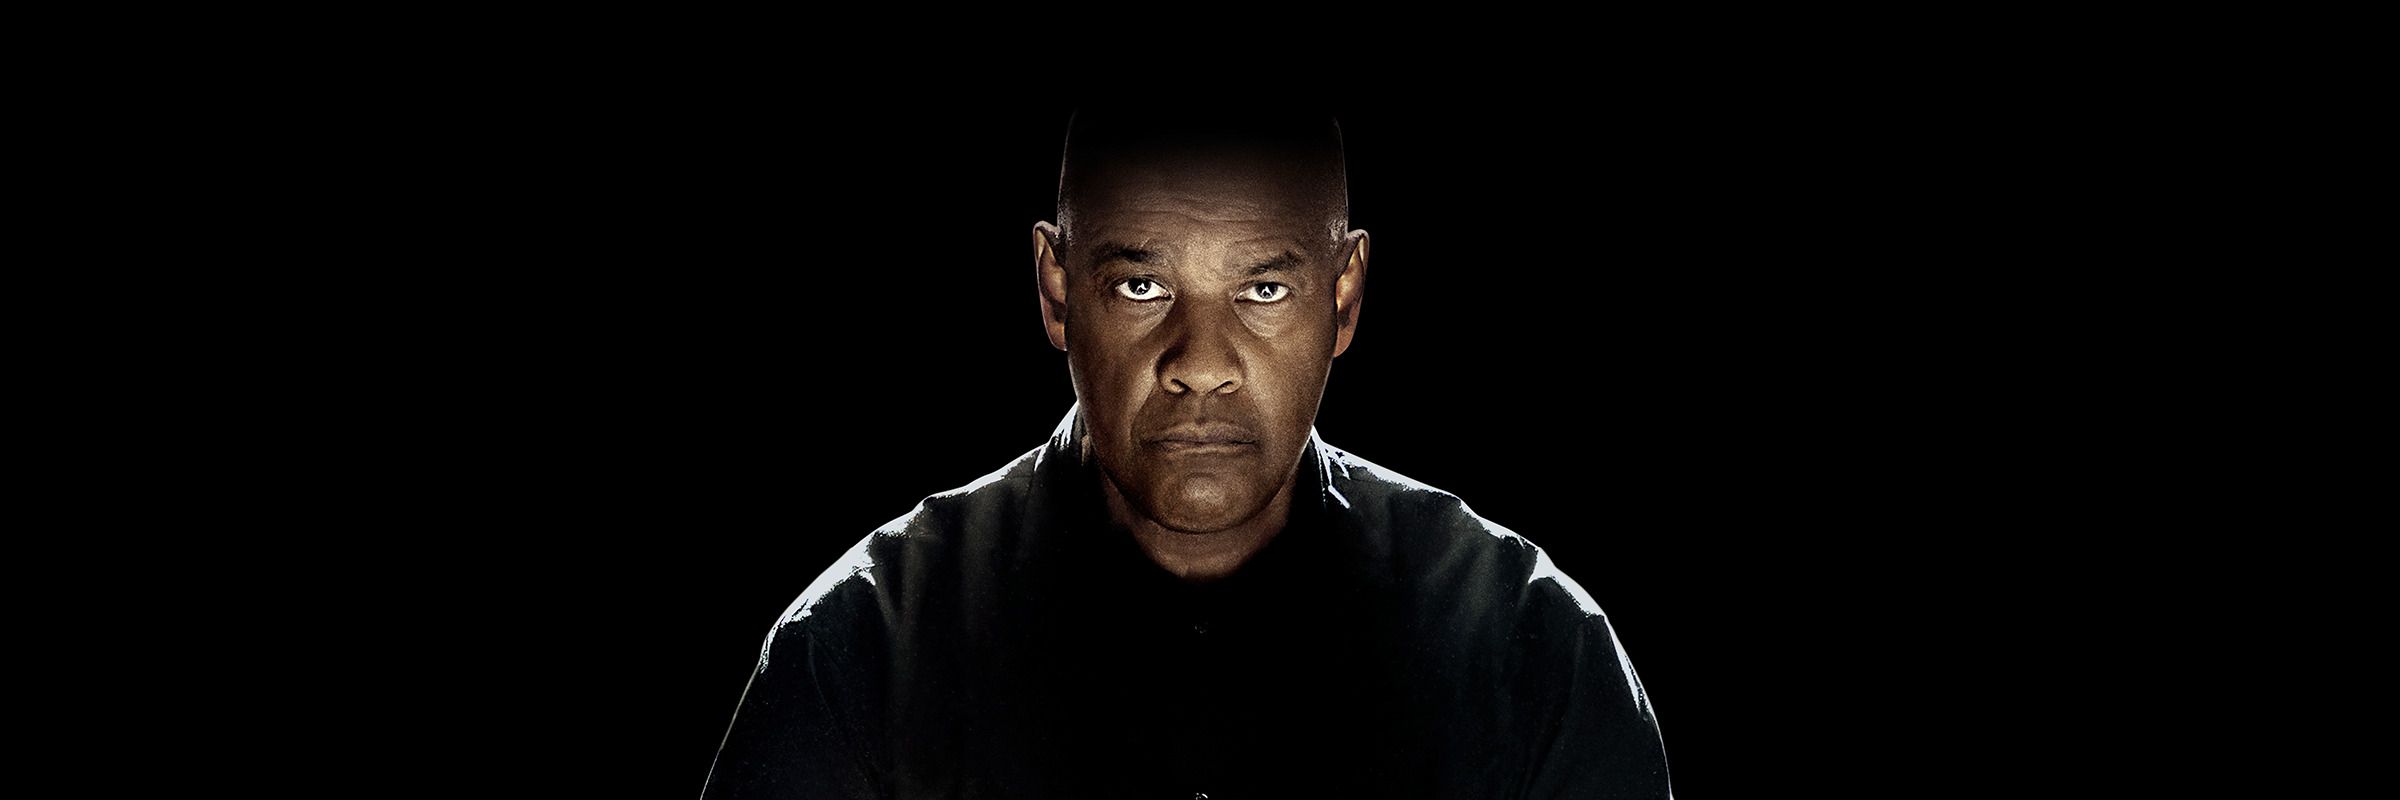 The Equalizer 3 UHD Review • Home Theater Forum